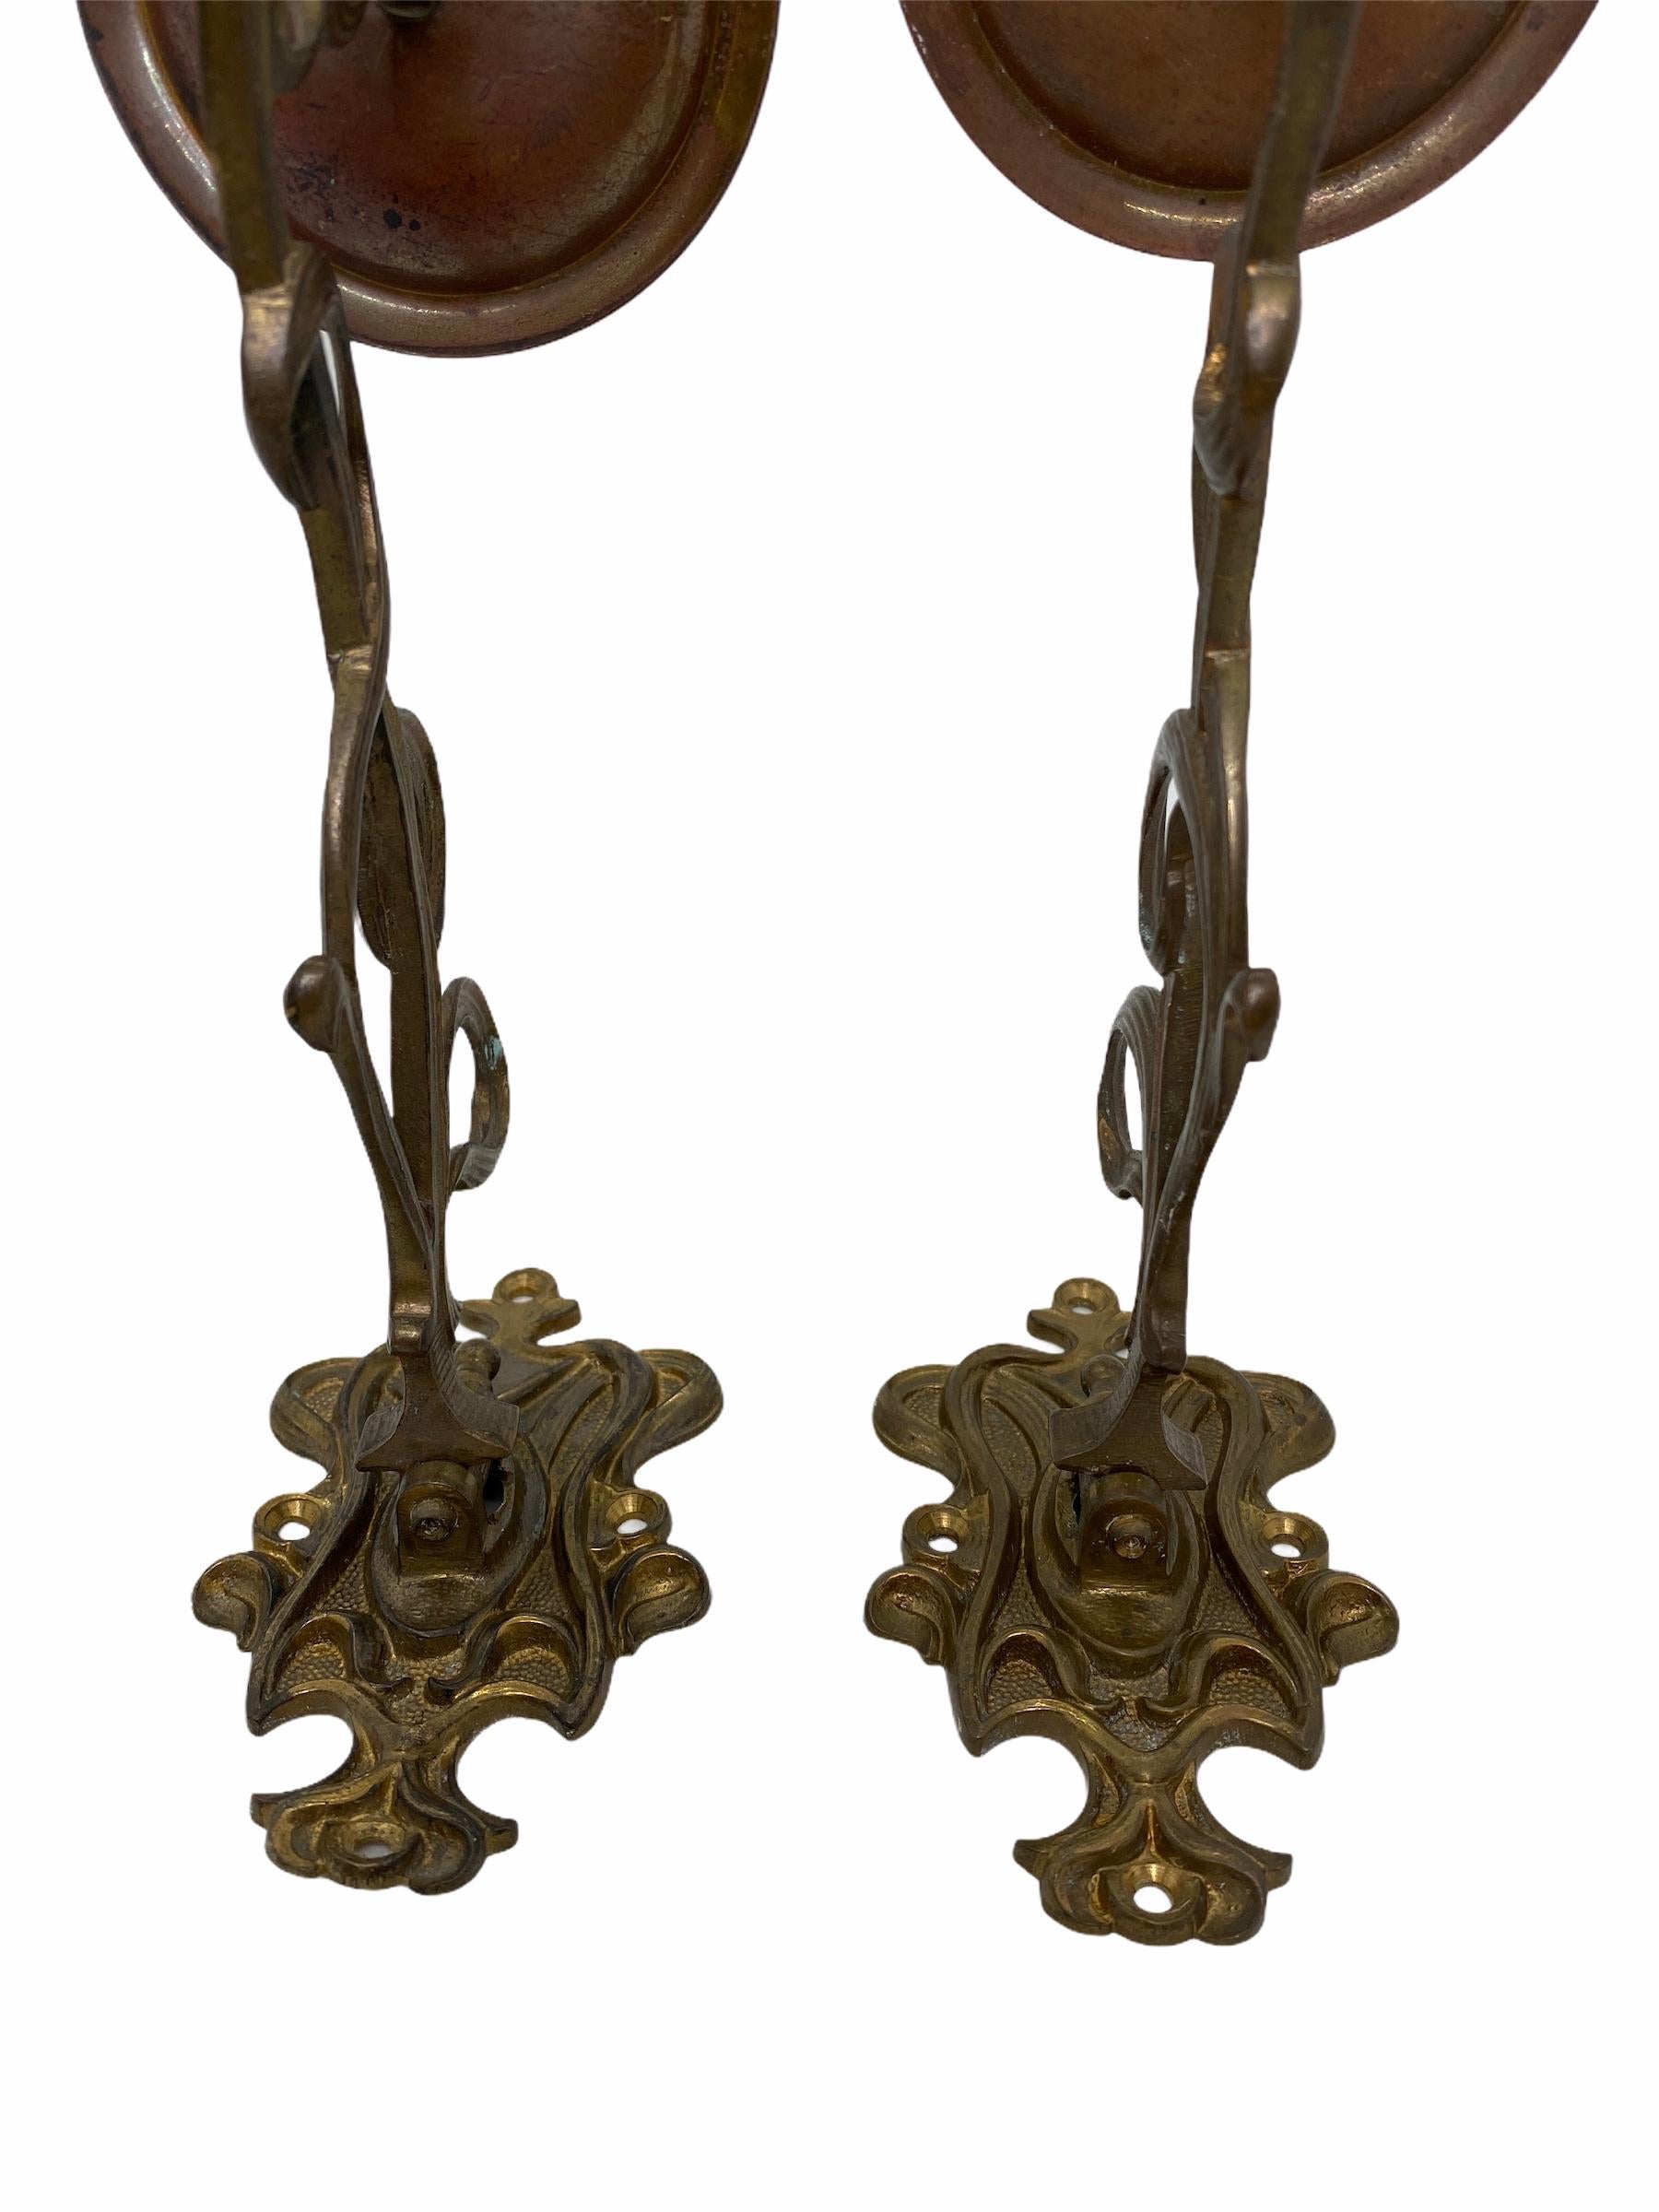 Two Original Bronze Art Nouveau Candle Sconce for a Piano or Wall Germany, 1890s 3